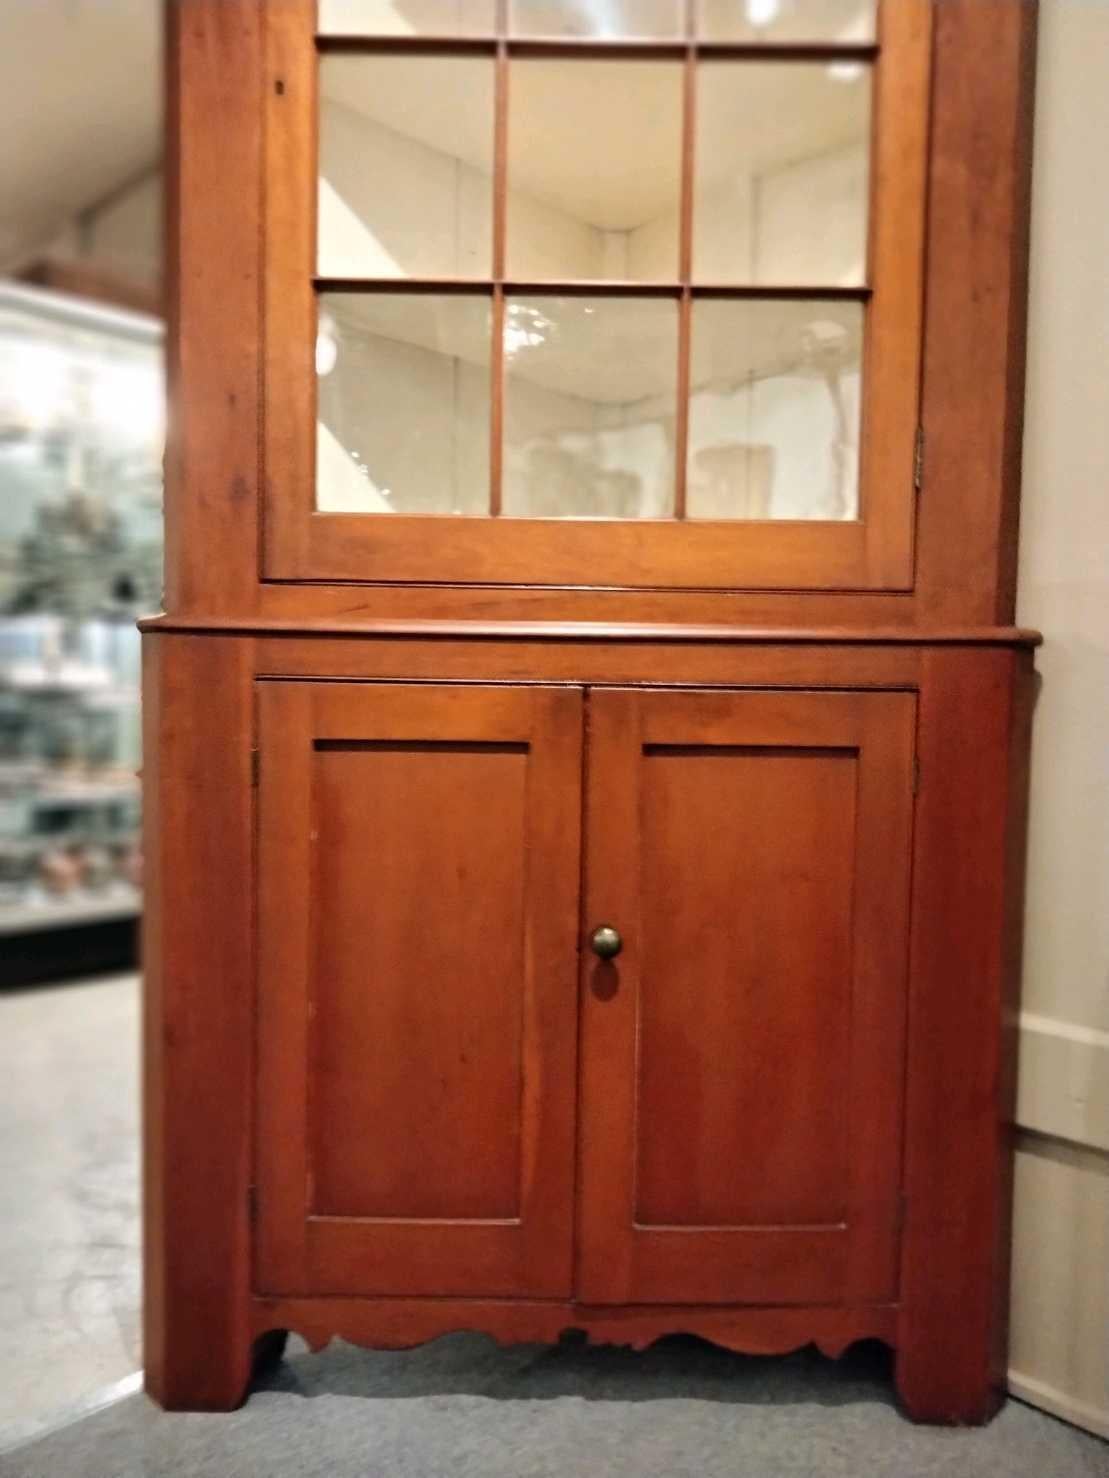 19Thc Original red painted two piece corner cabinet was found in Lancaster County,Pennsylvania and is in pristine condition.The interior is in cream colored paint is later painted interior. Le meuble est en bois de cerisier avec une peinture rouge.